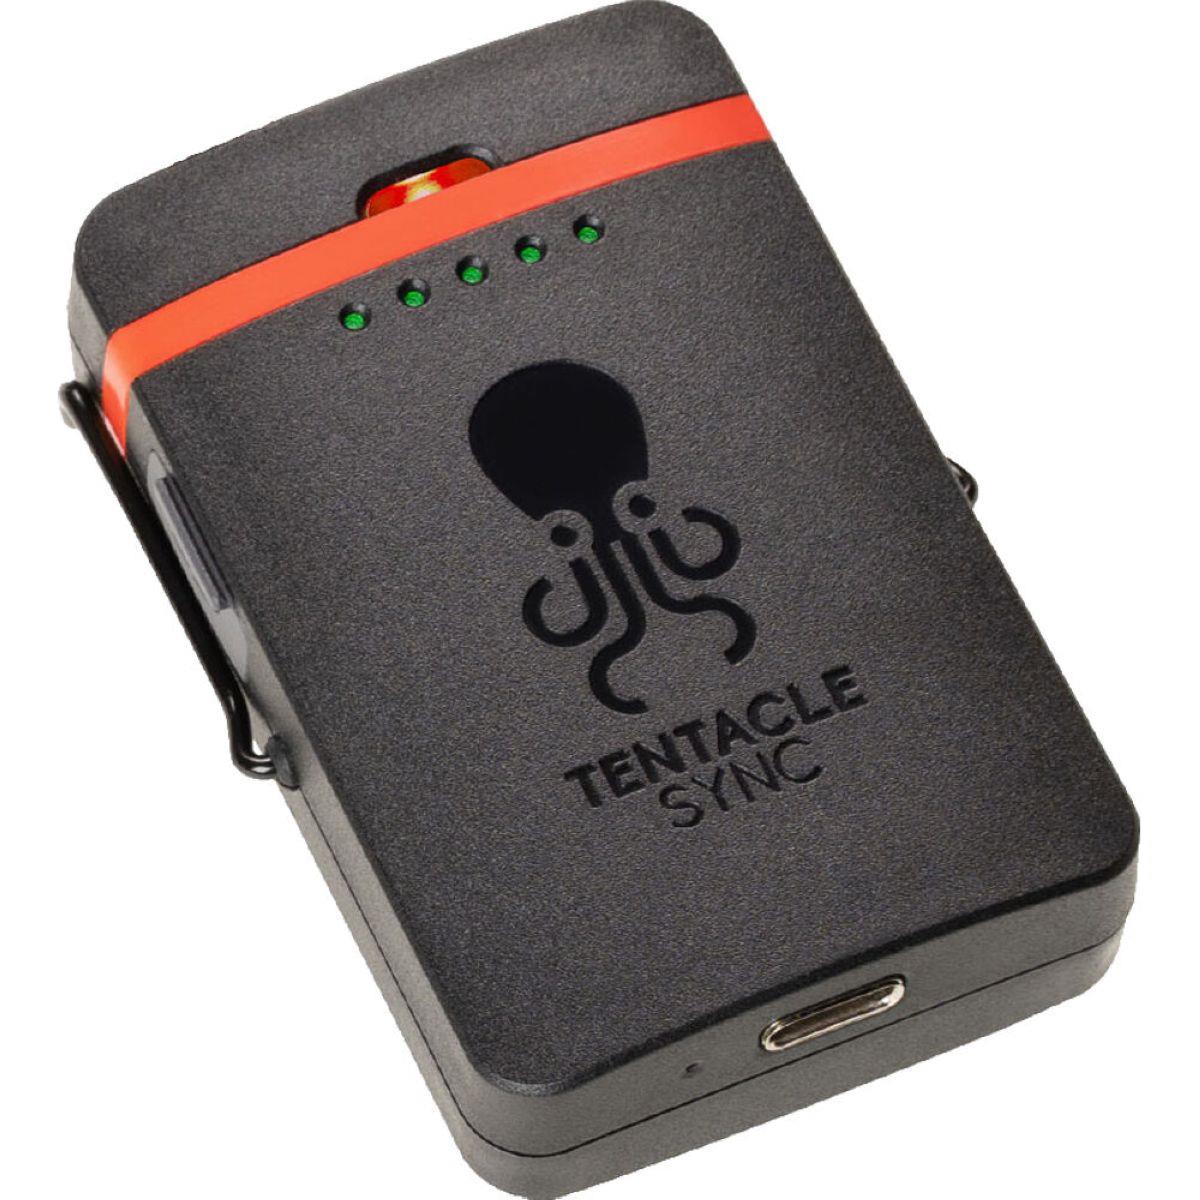 Photos - Portable Recorder Tentacle Sync TRACK E Pocket Audio Recorder w/Timecode Support - Recorder